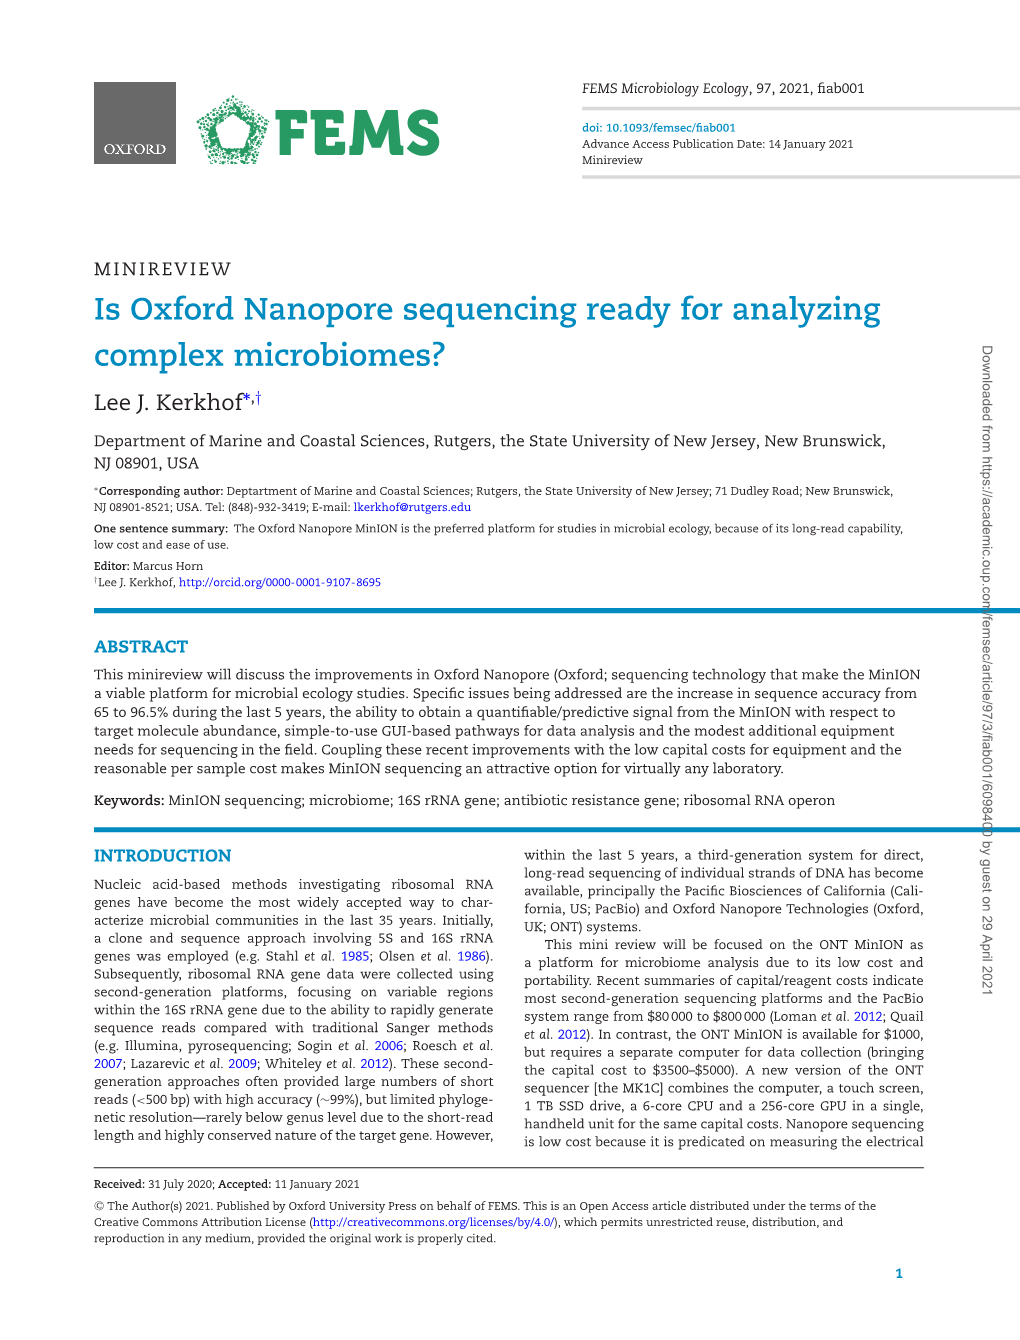 Is Oxford Nanopore Sequencing Ready for Analyzing Complex Microbiomes?